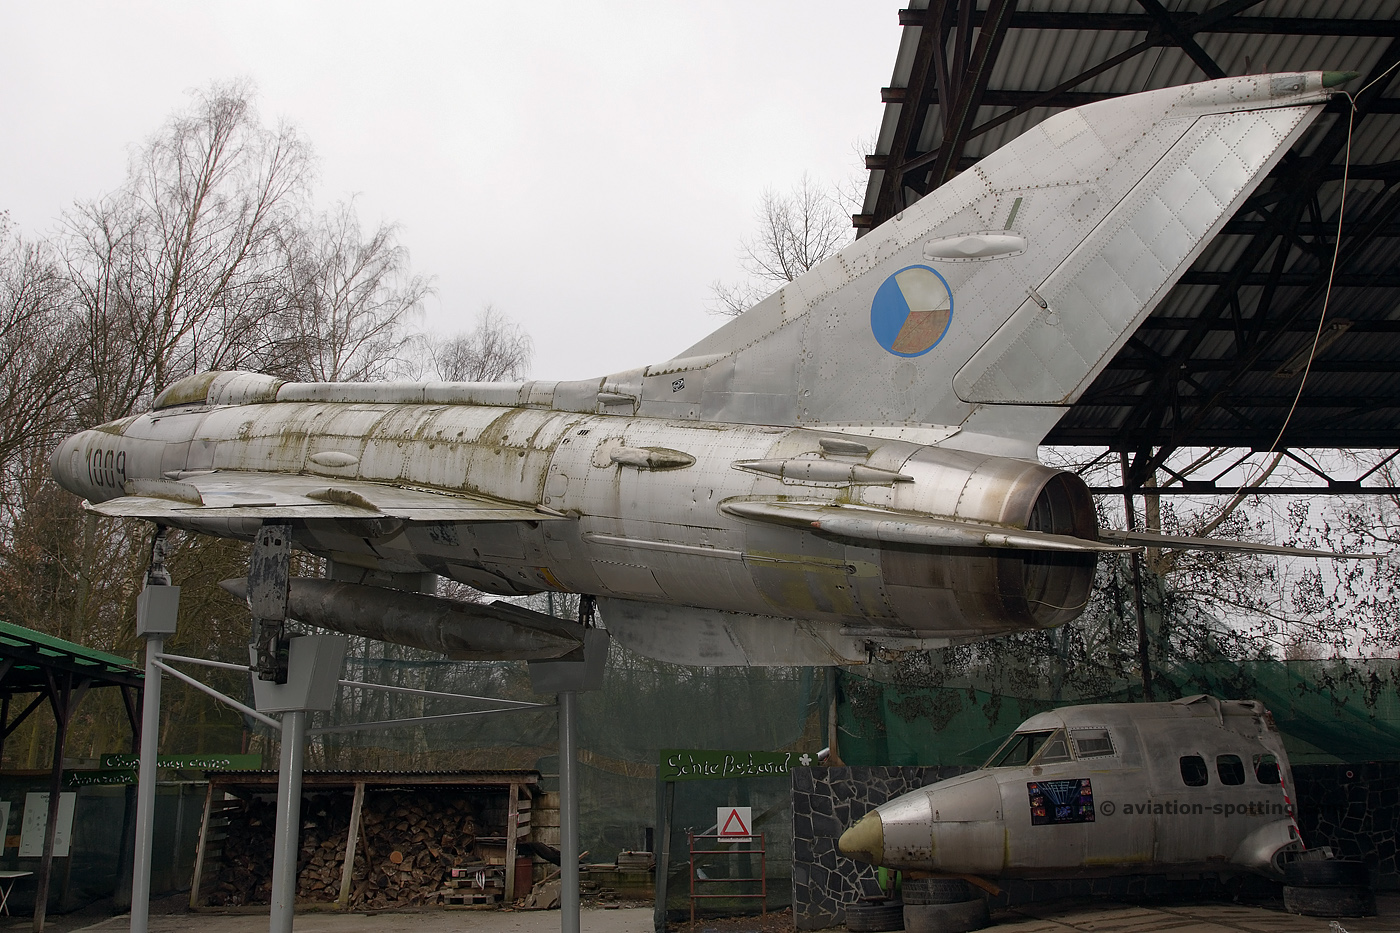 1009 Mikoyan-Gurevich MiG-21F-13 Fishbed Czech Air Force